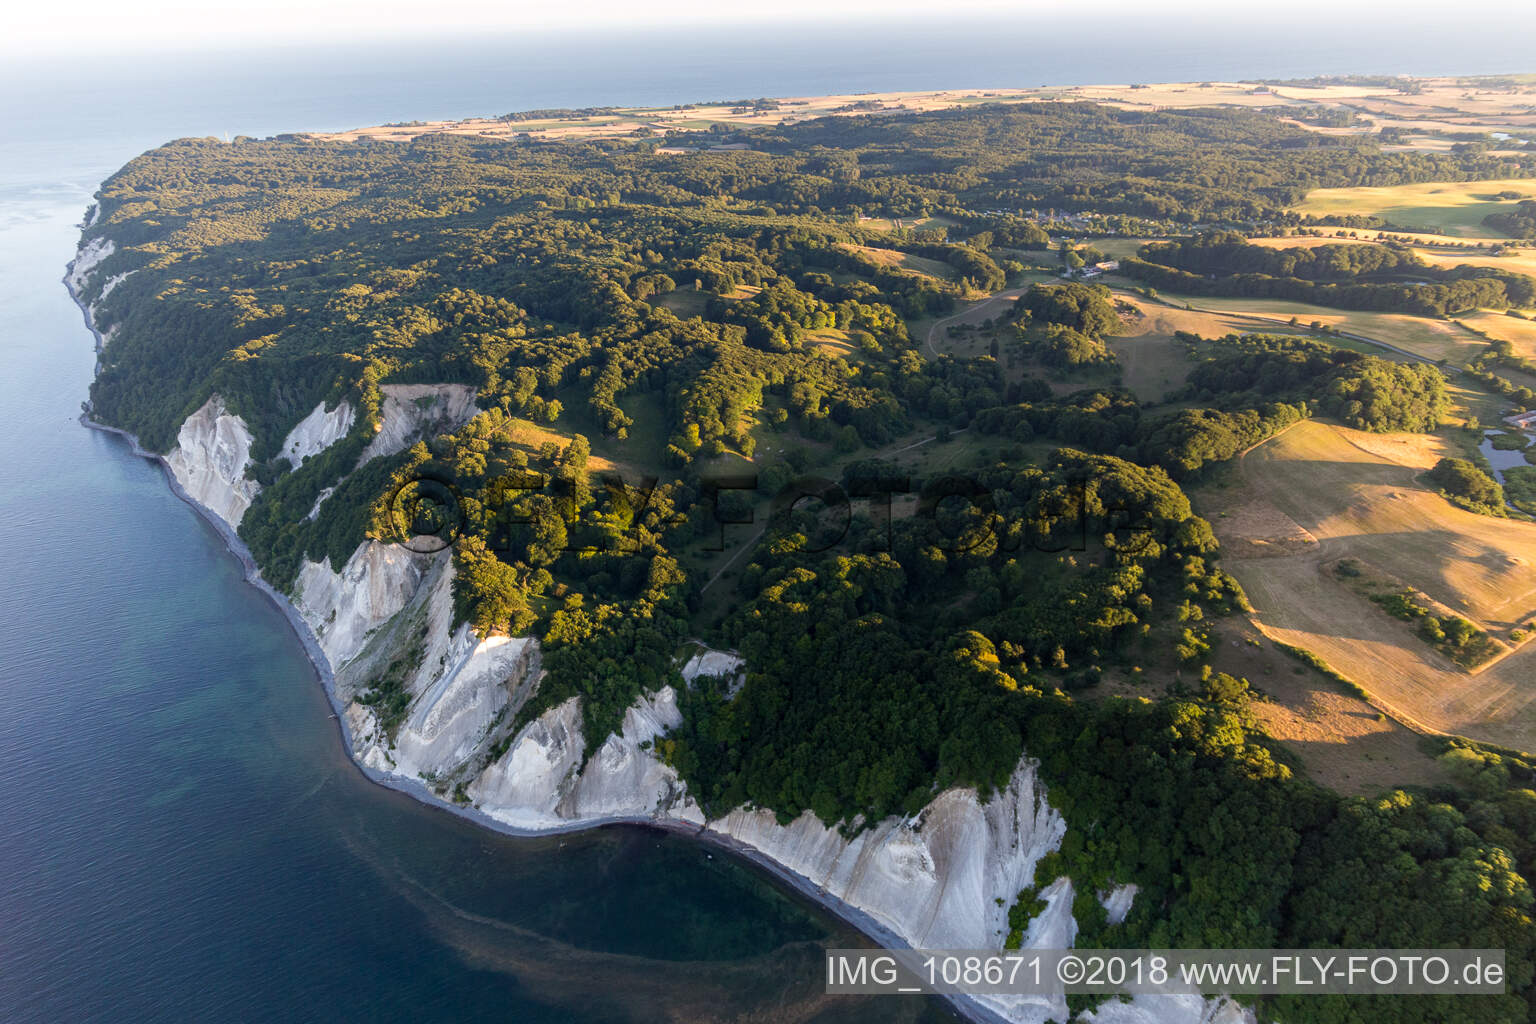 Aerial view of Forests of Moens Klint on the high shores of the Baltic sea in Borre in Region Sjaelland, Denmark